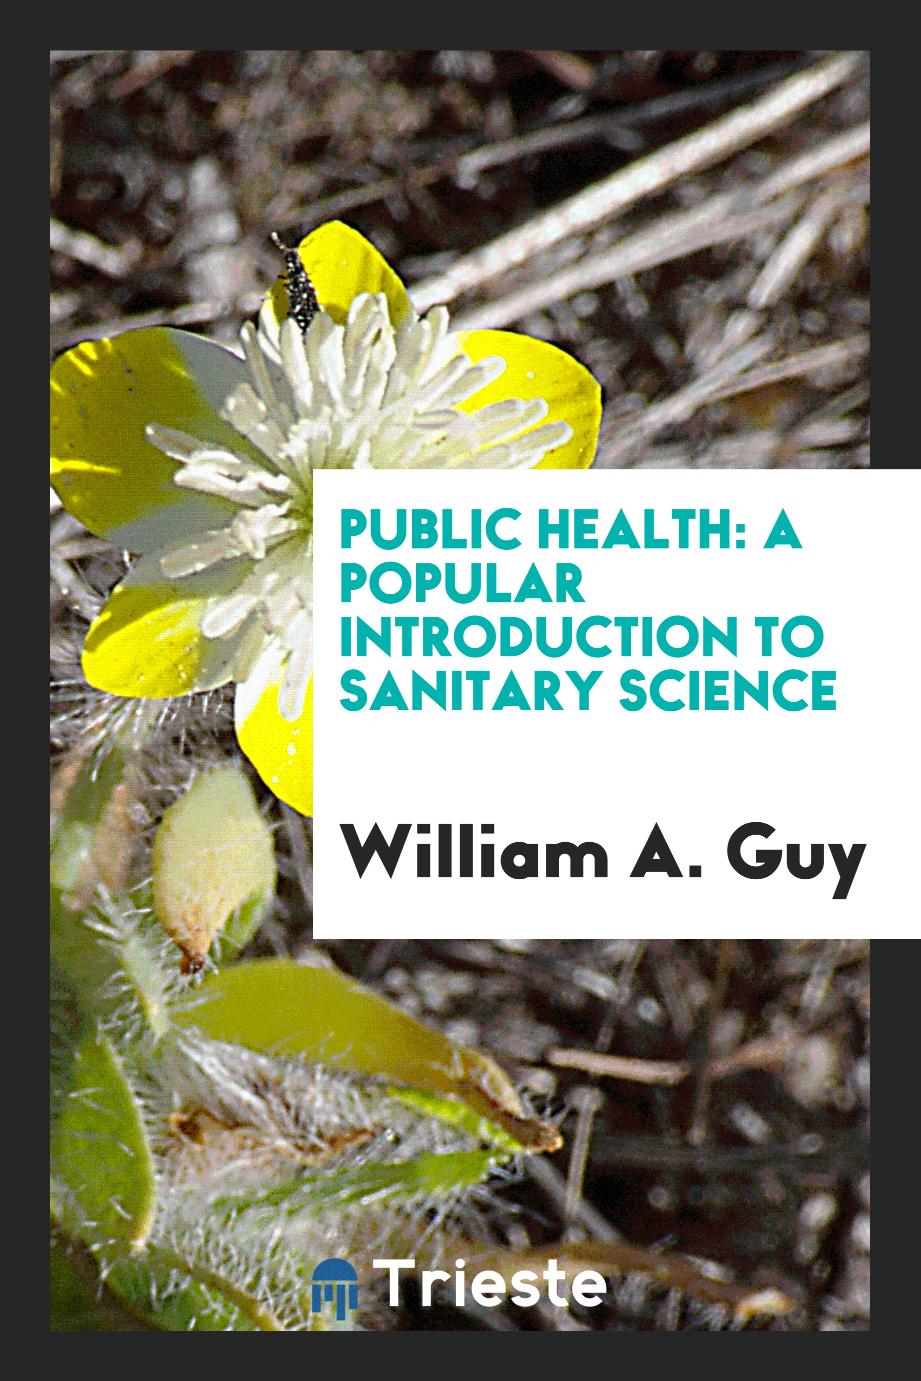 Public health: a popular introduction to sanitary science